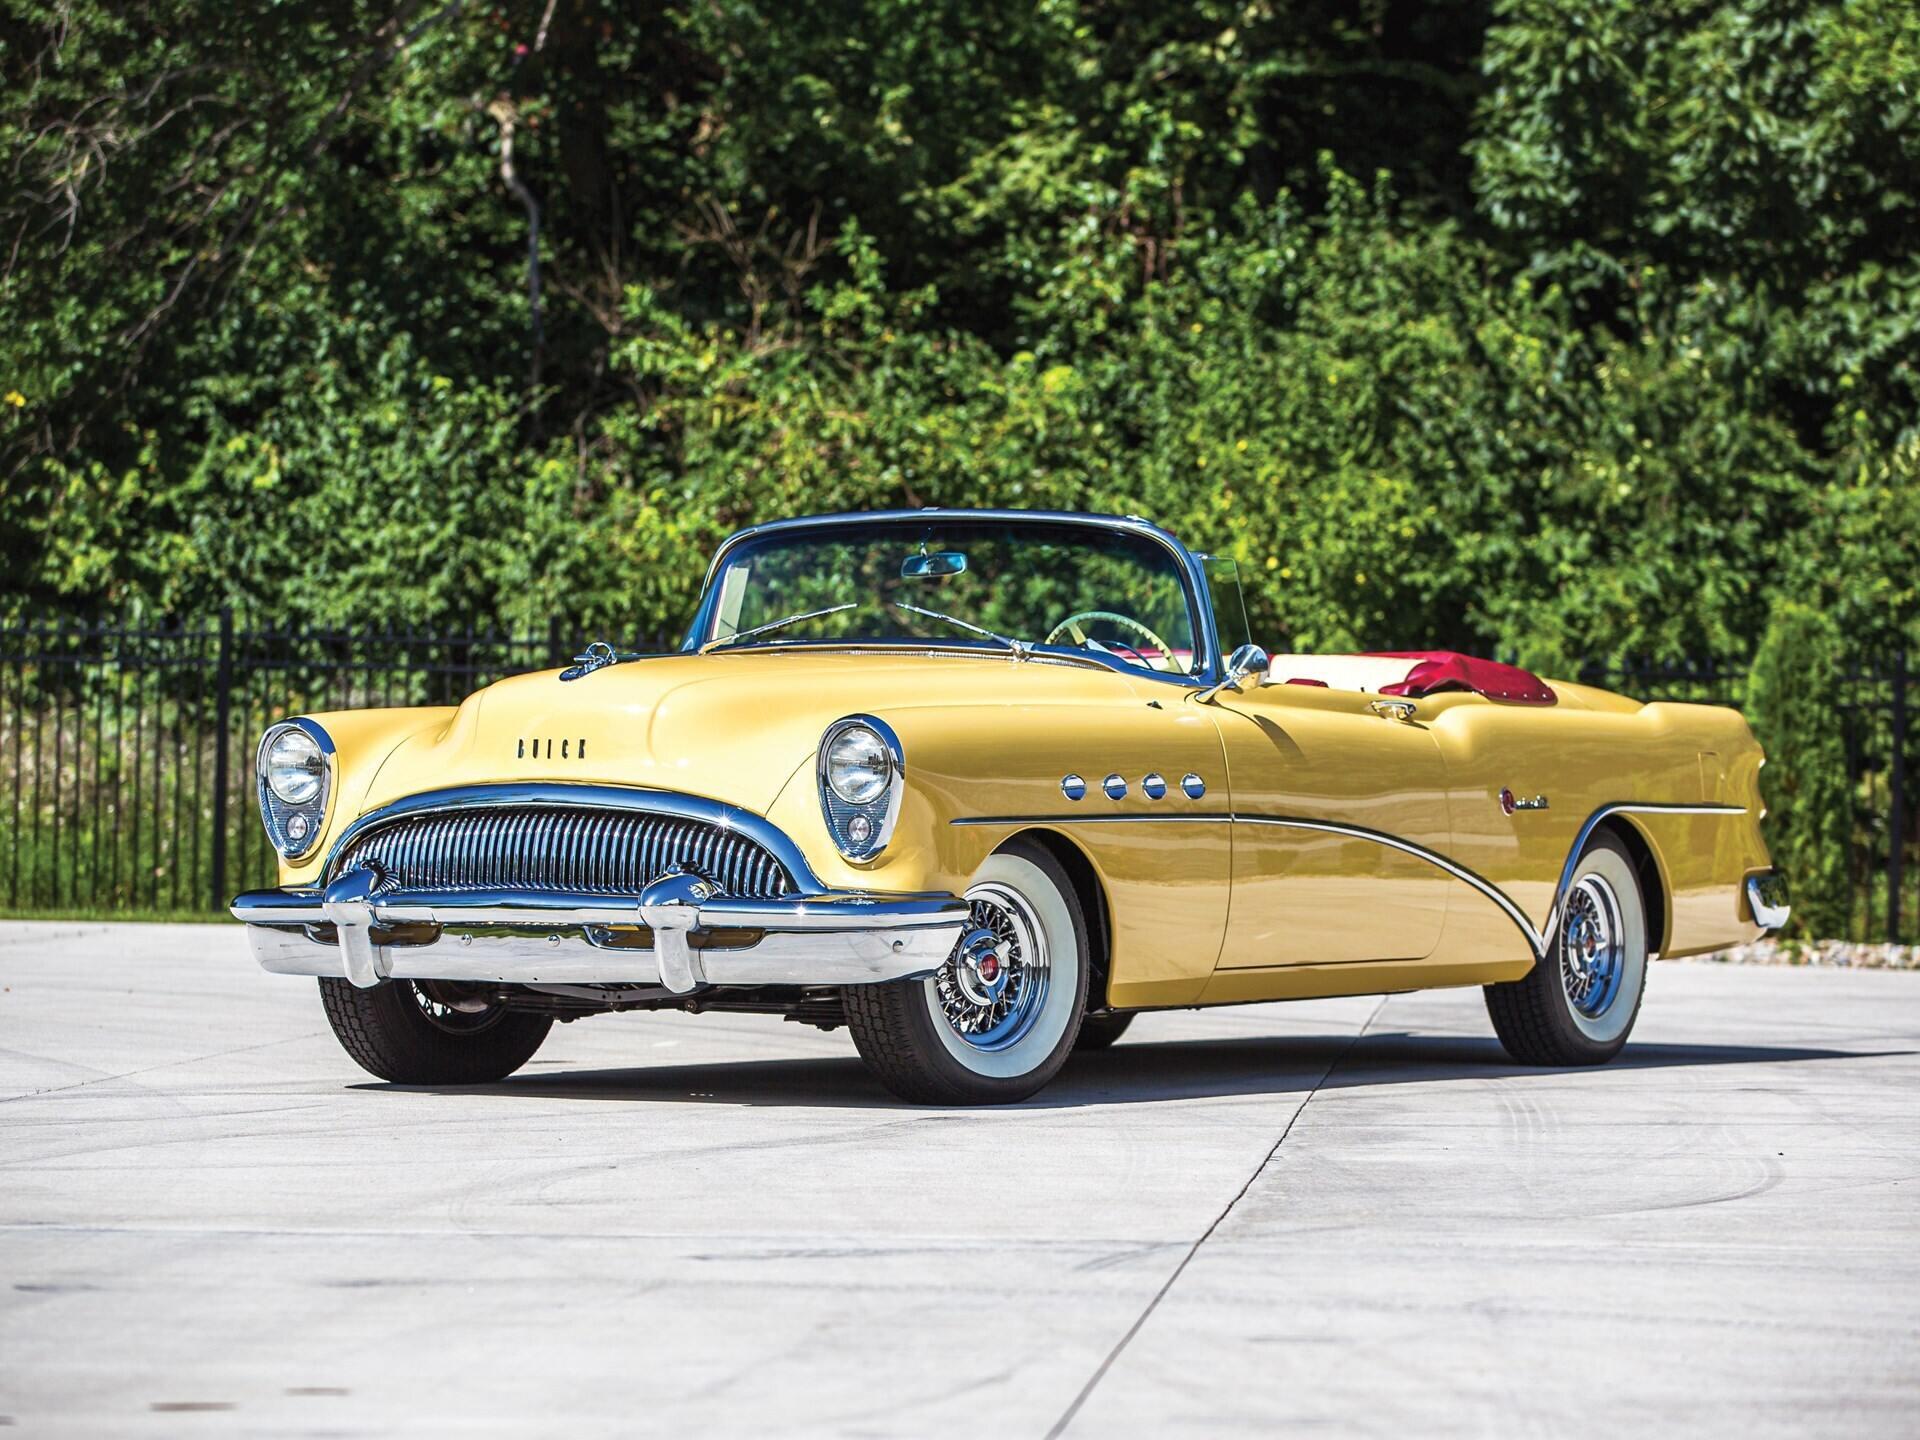 1954 Buick Roadmaster: A Fusion of Timeless Design and Automotive Artistry